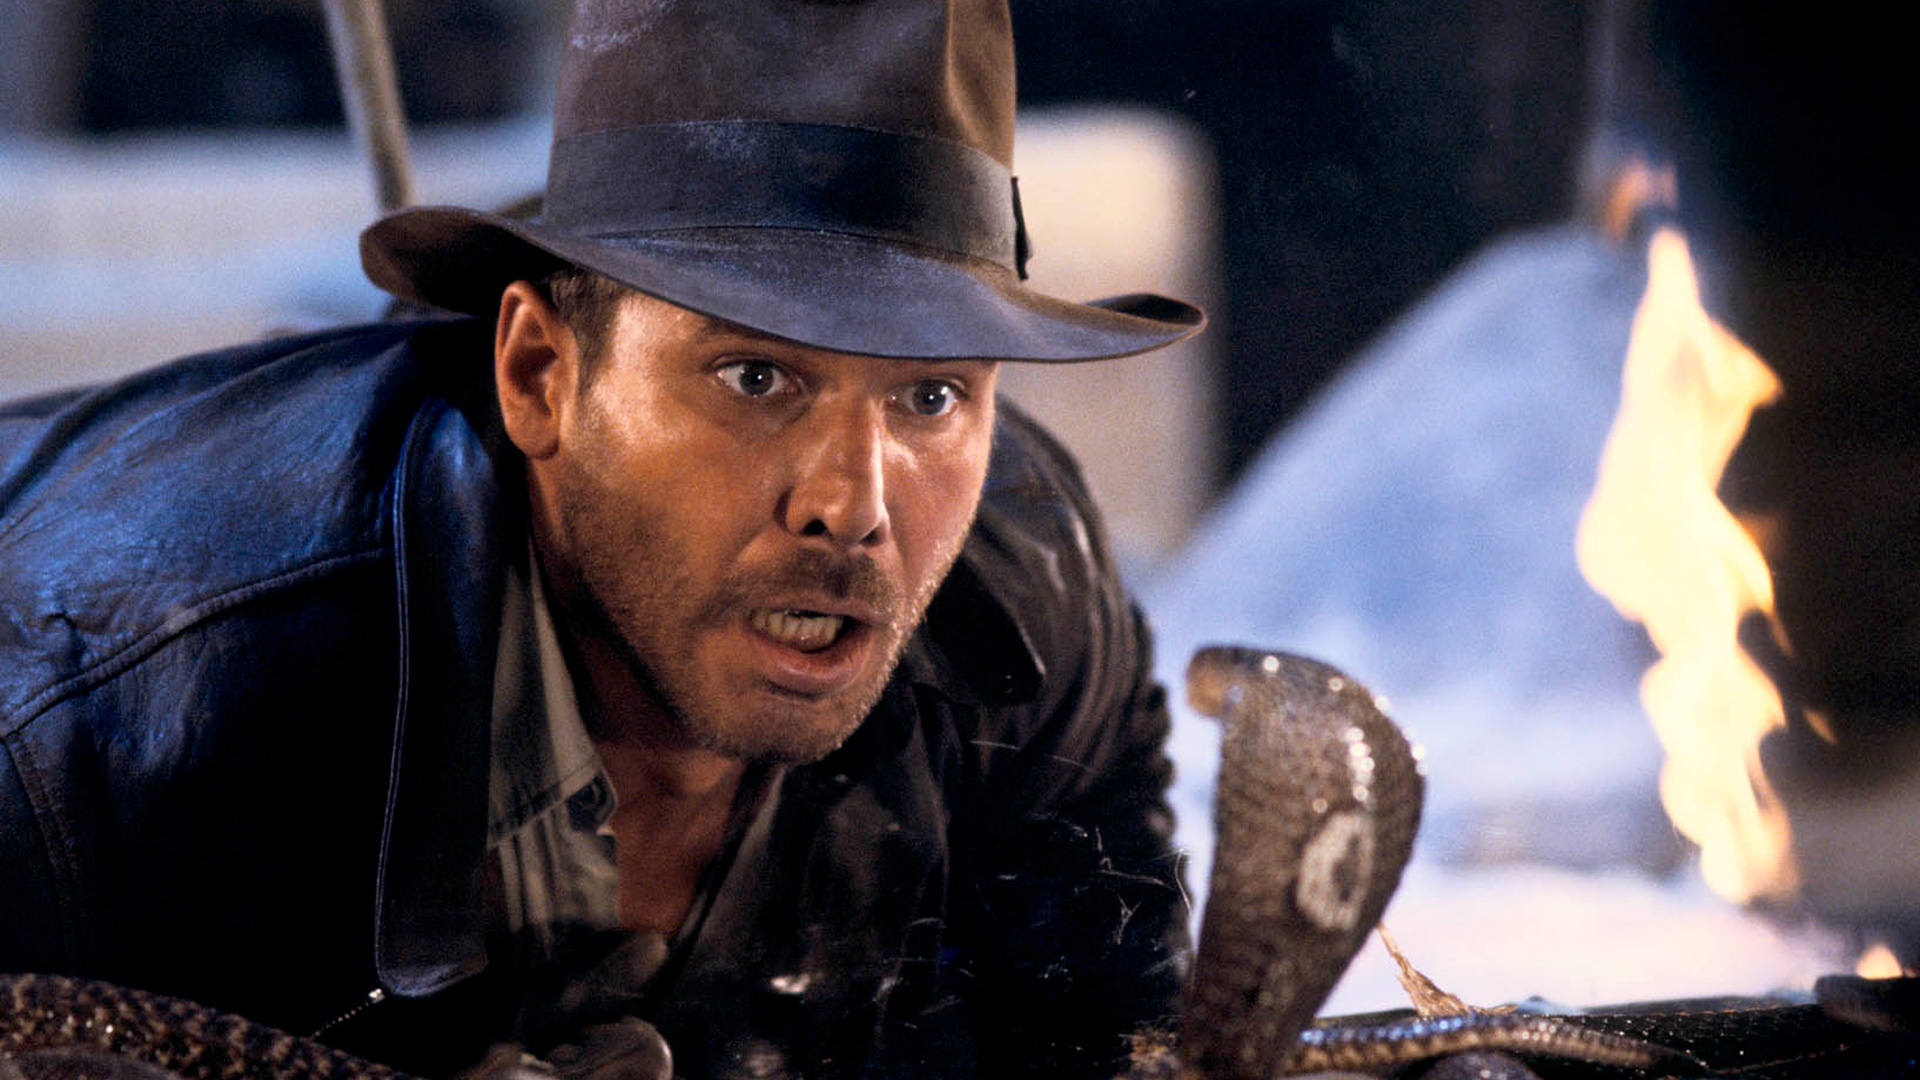 Indiana Jones face to face with a snake